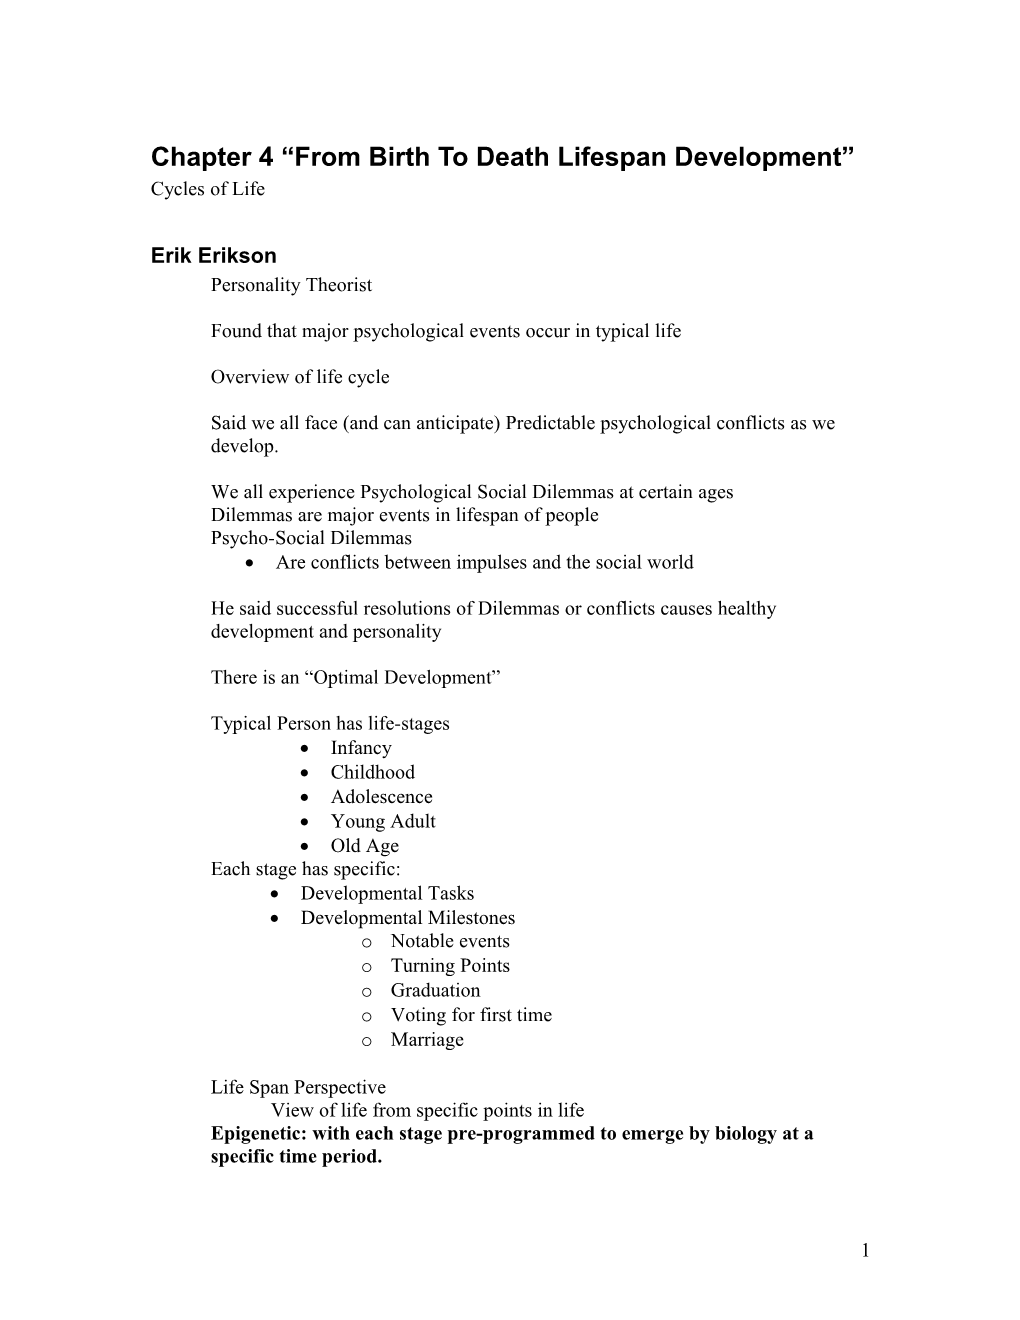 Chapter 4 from Birth to Death Lifespan Development